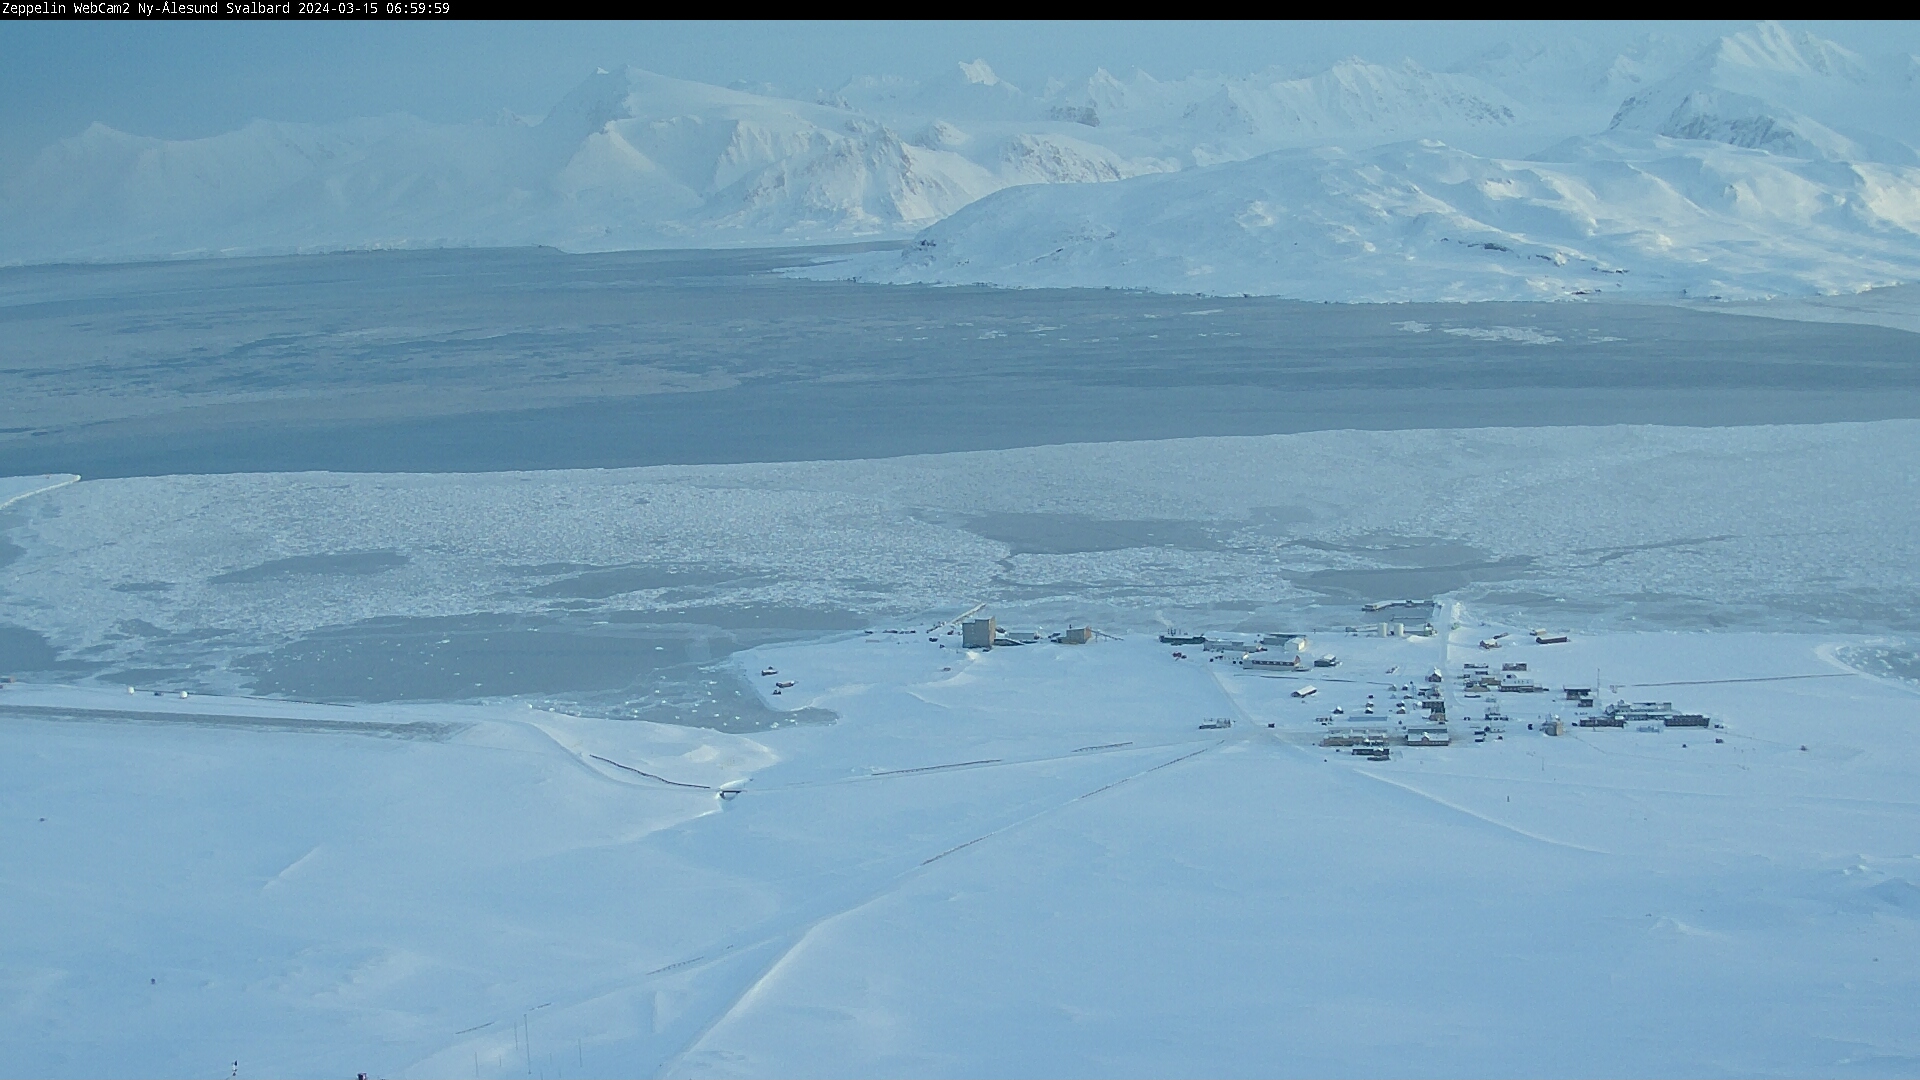 Web Camera is located in Svalbard.